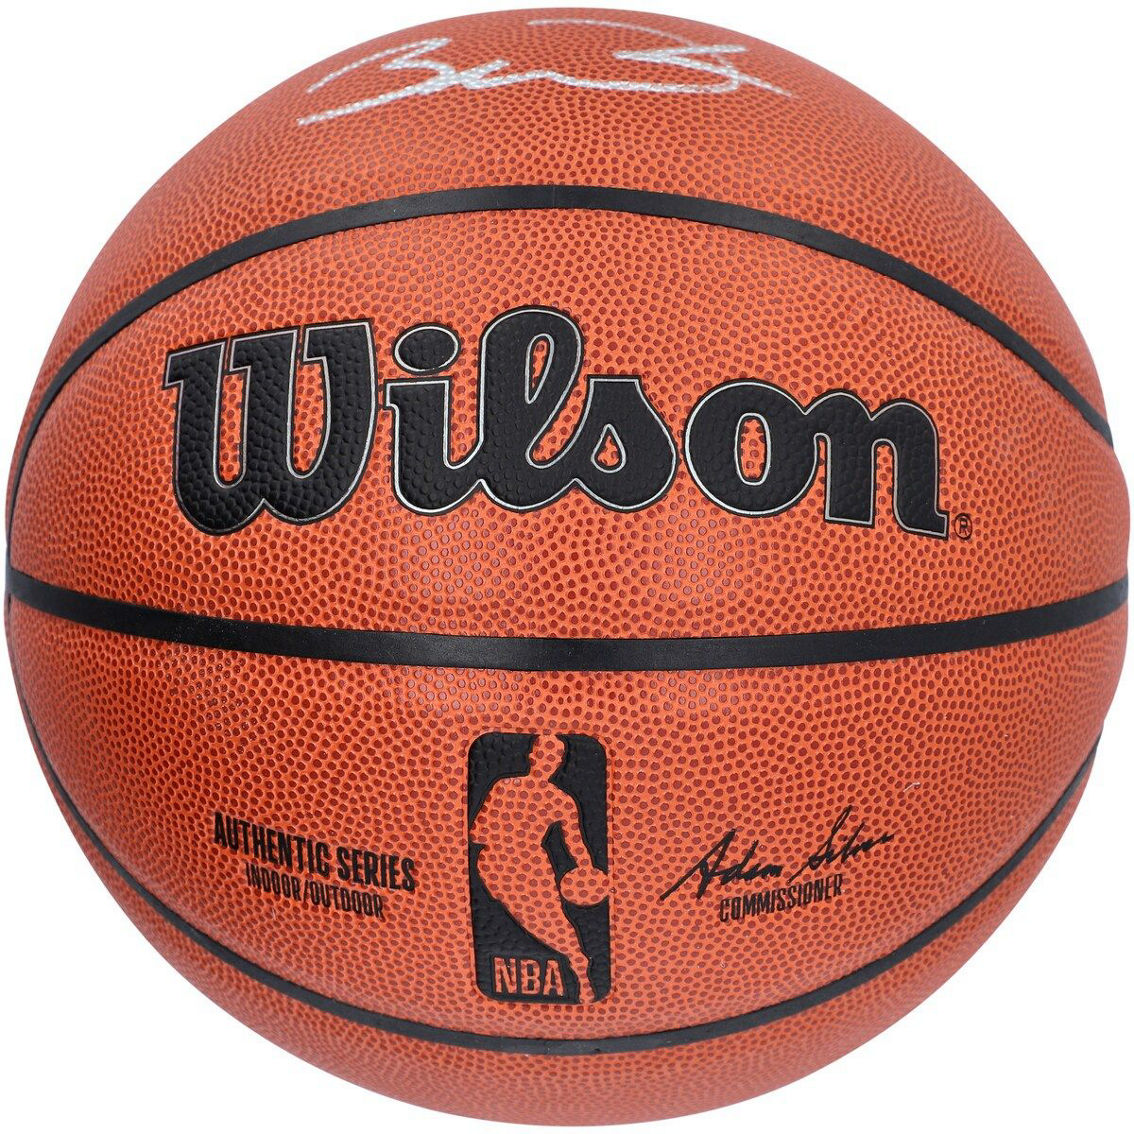 Fanatics Authentic Dwyane Wade Miami Heat Autographed Wilson Authentic Series Indoor/Outdoor Basketball - Image 3 of 3